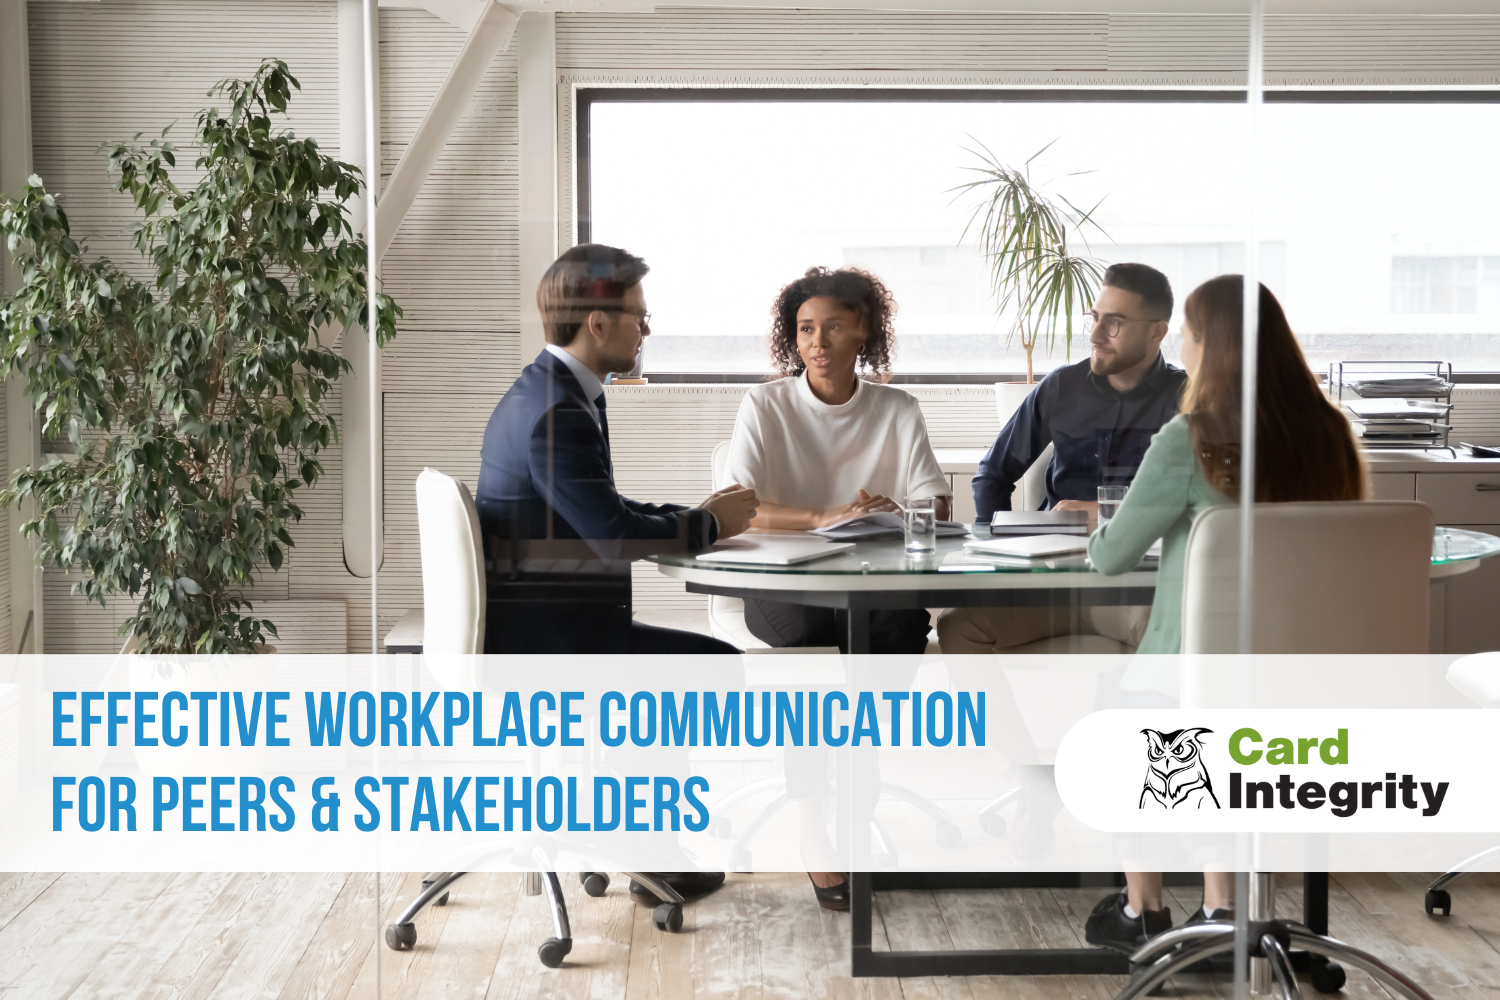 Effective communication among peers and stakeholders is especially important for procurement managers.